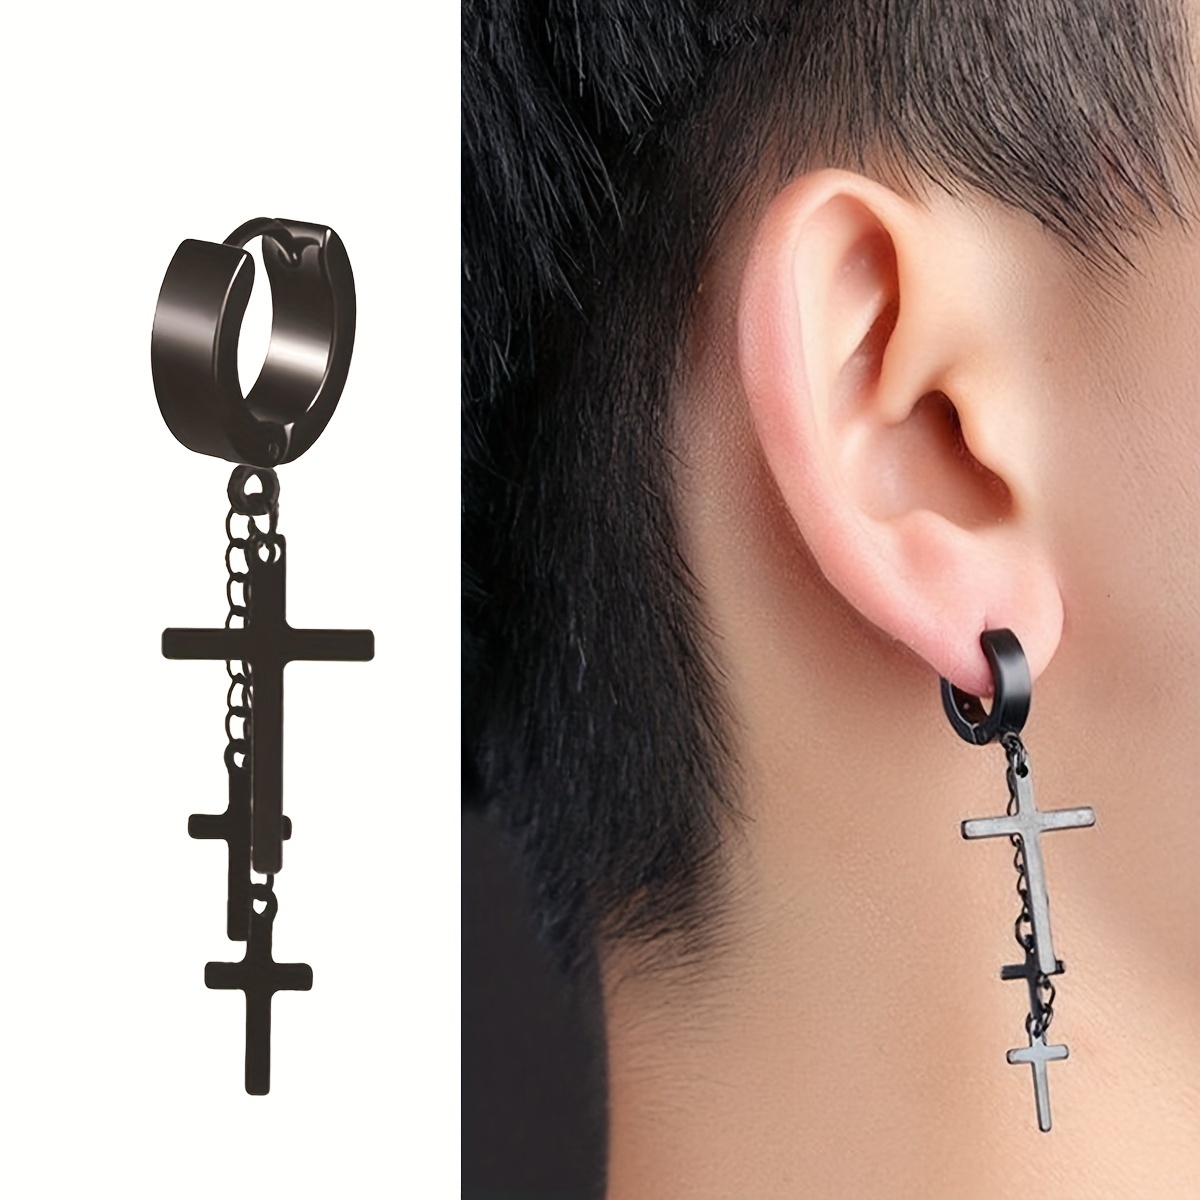 Punk Cross Clip Cross Earrings Men Cuff With Tassel Pendant Exaggerated One  Piece Piercing Jewelry For Girls And Women From Kittyshaw2019, $0.65